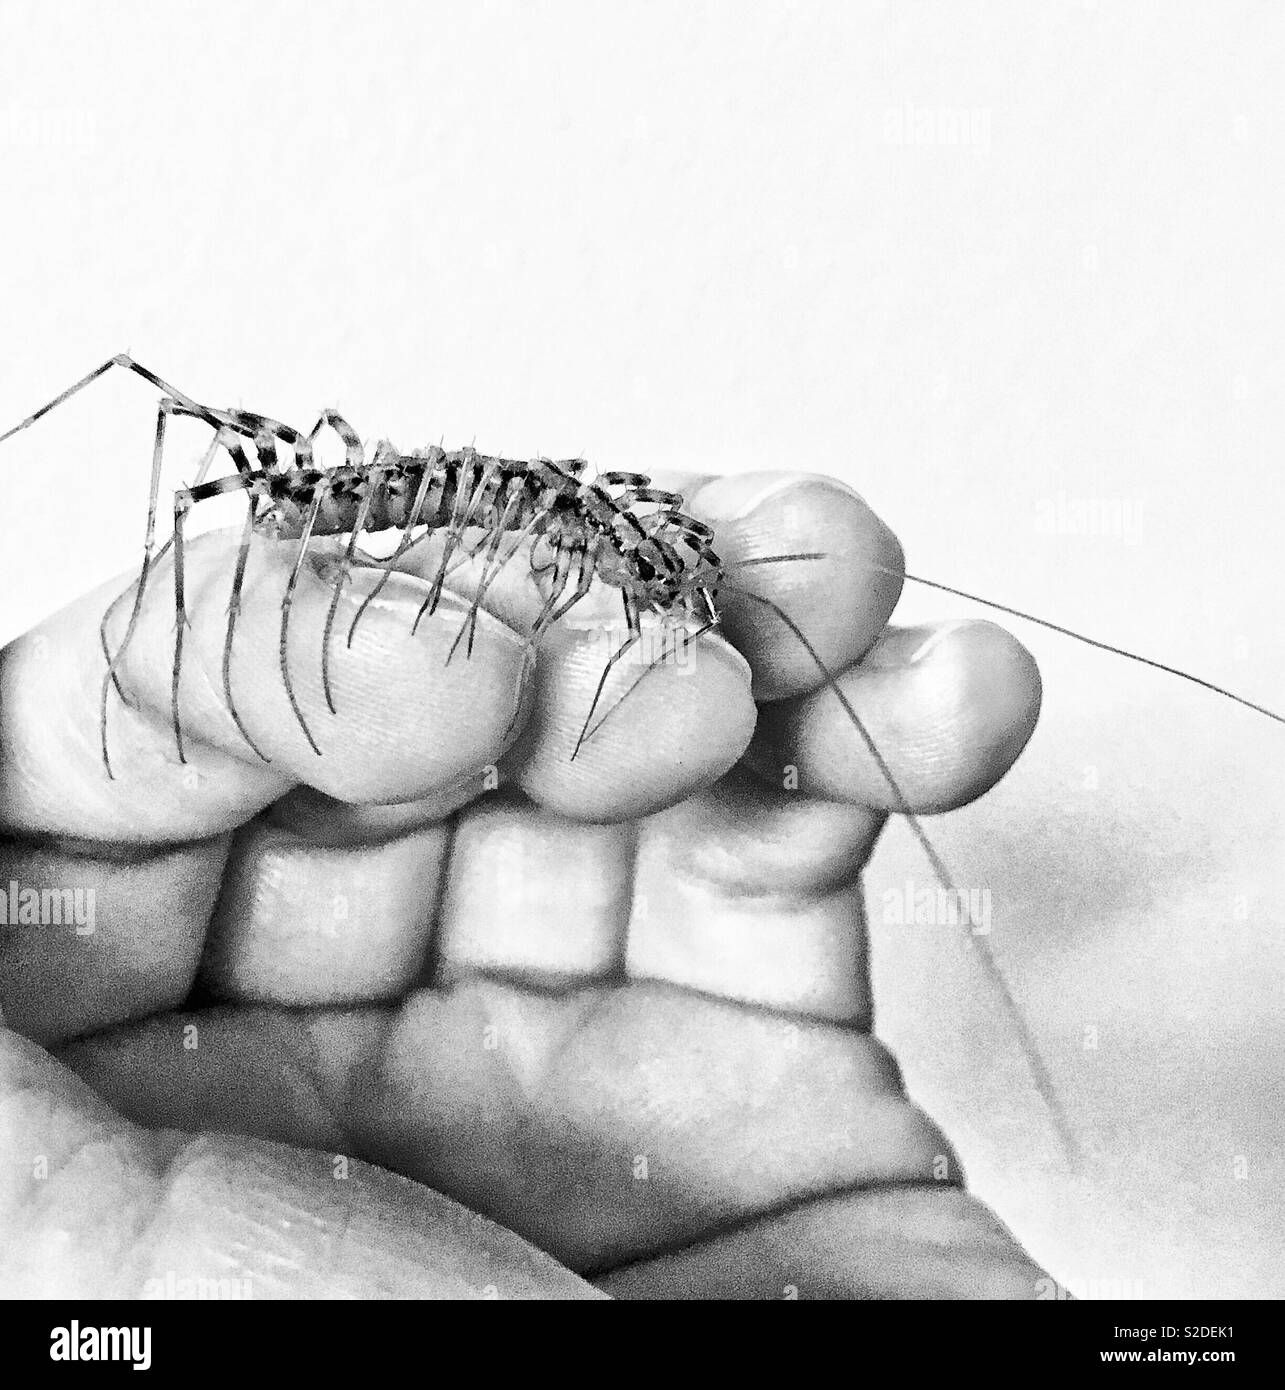 Huge centipede crawling on human hand in black and white Stock Photo